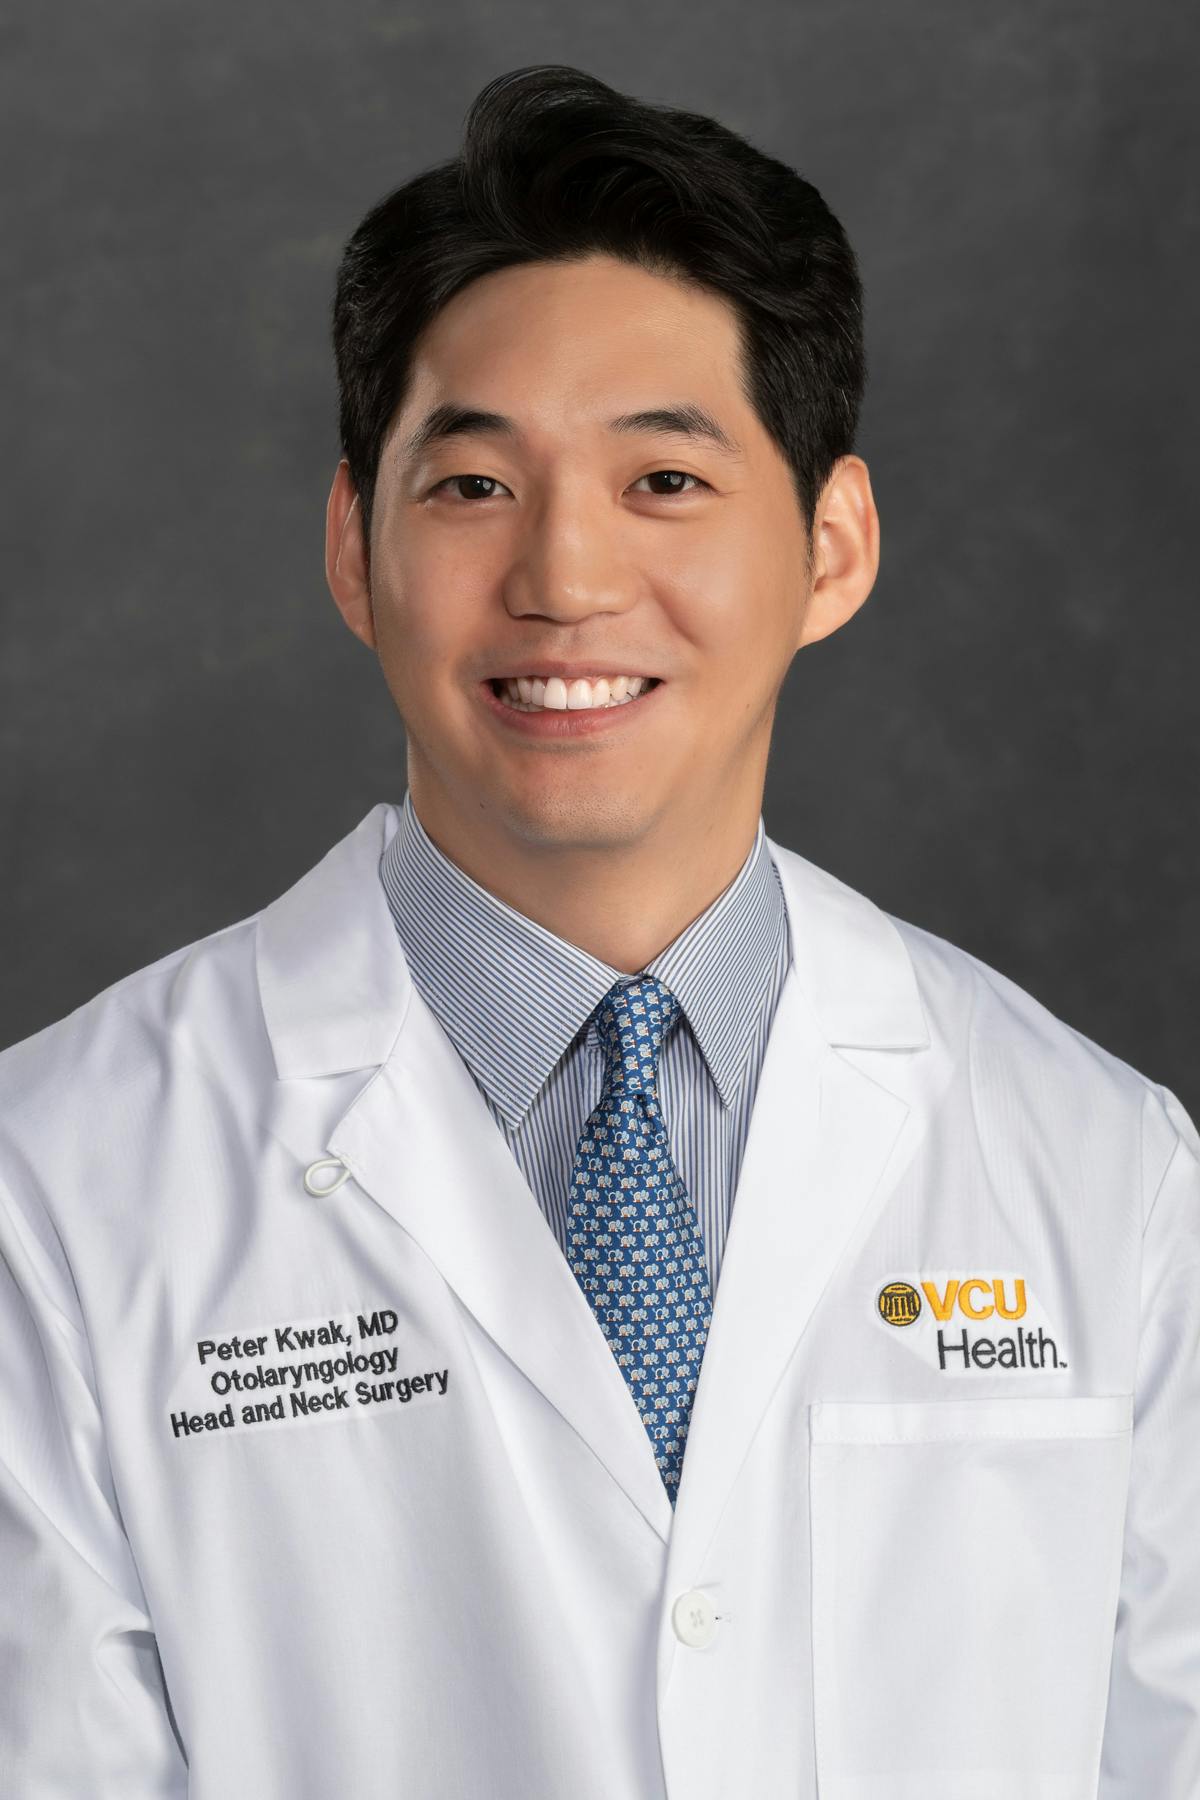 Author Peter Kwak, MD